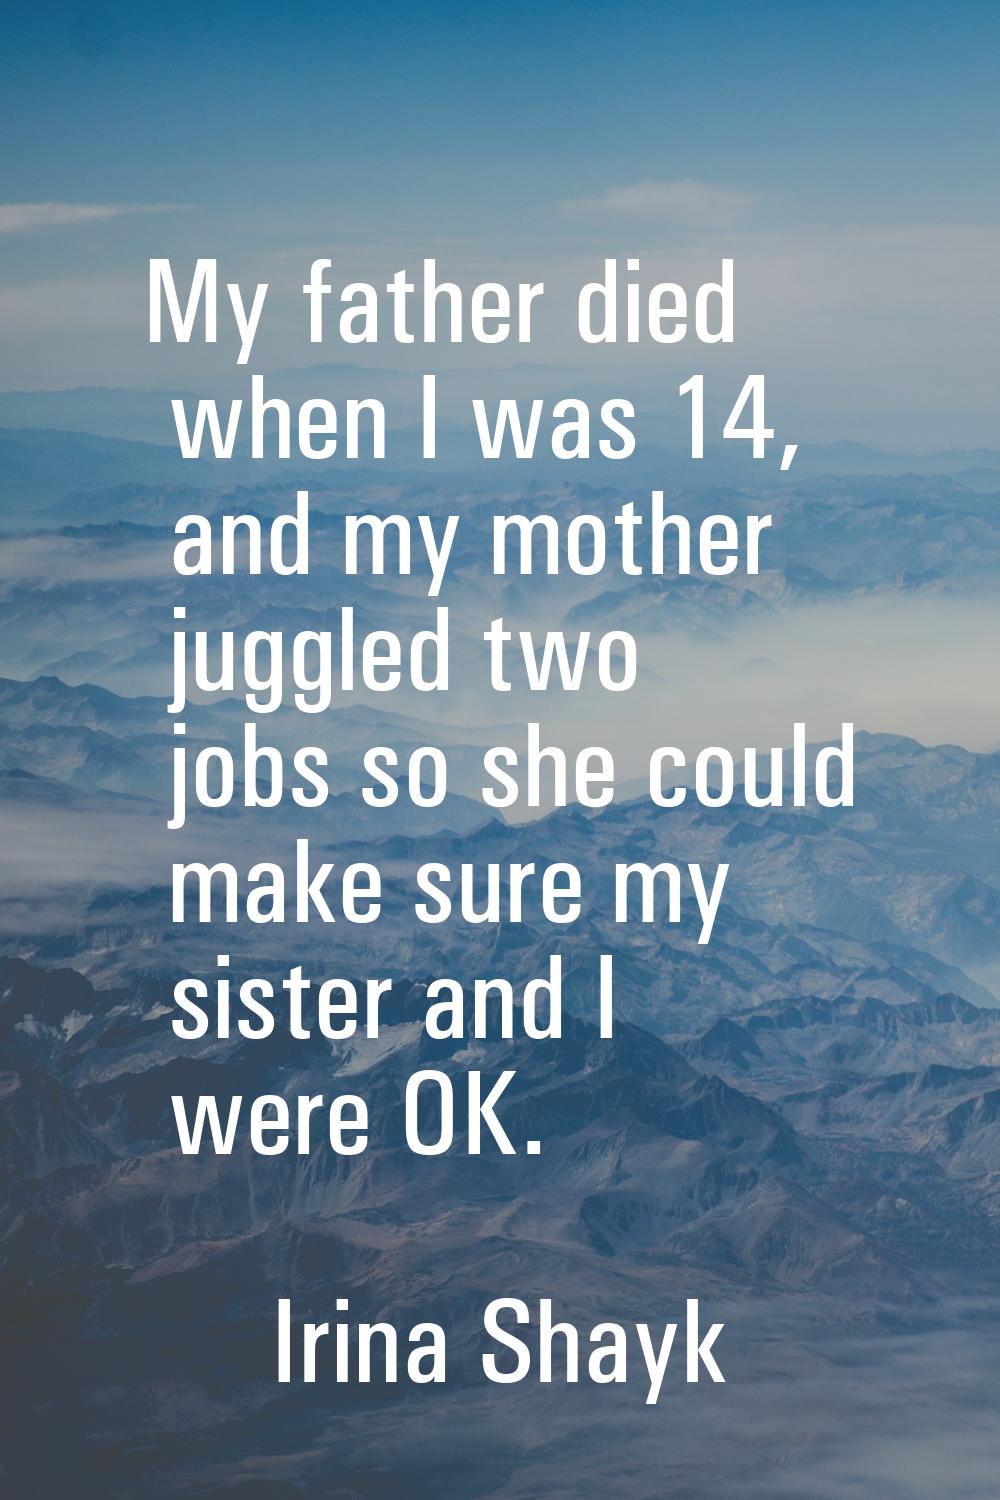 My father died when I was 14, and my mother juggled two jobs so she could make sure my sister and I